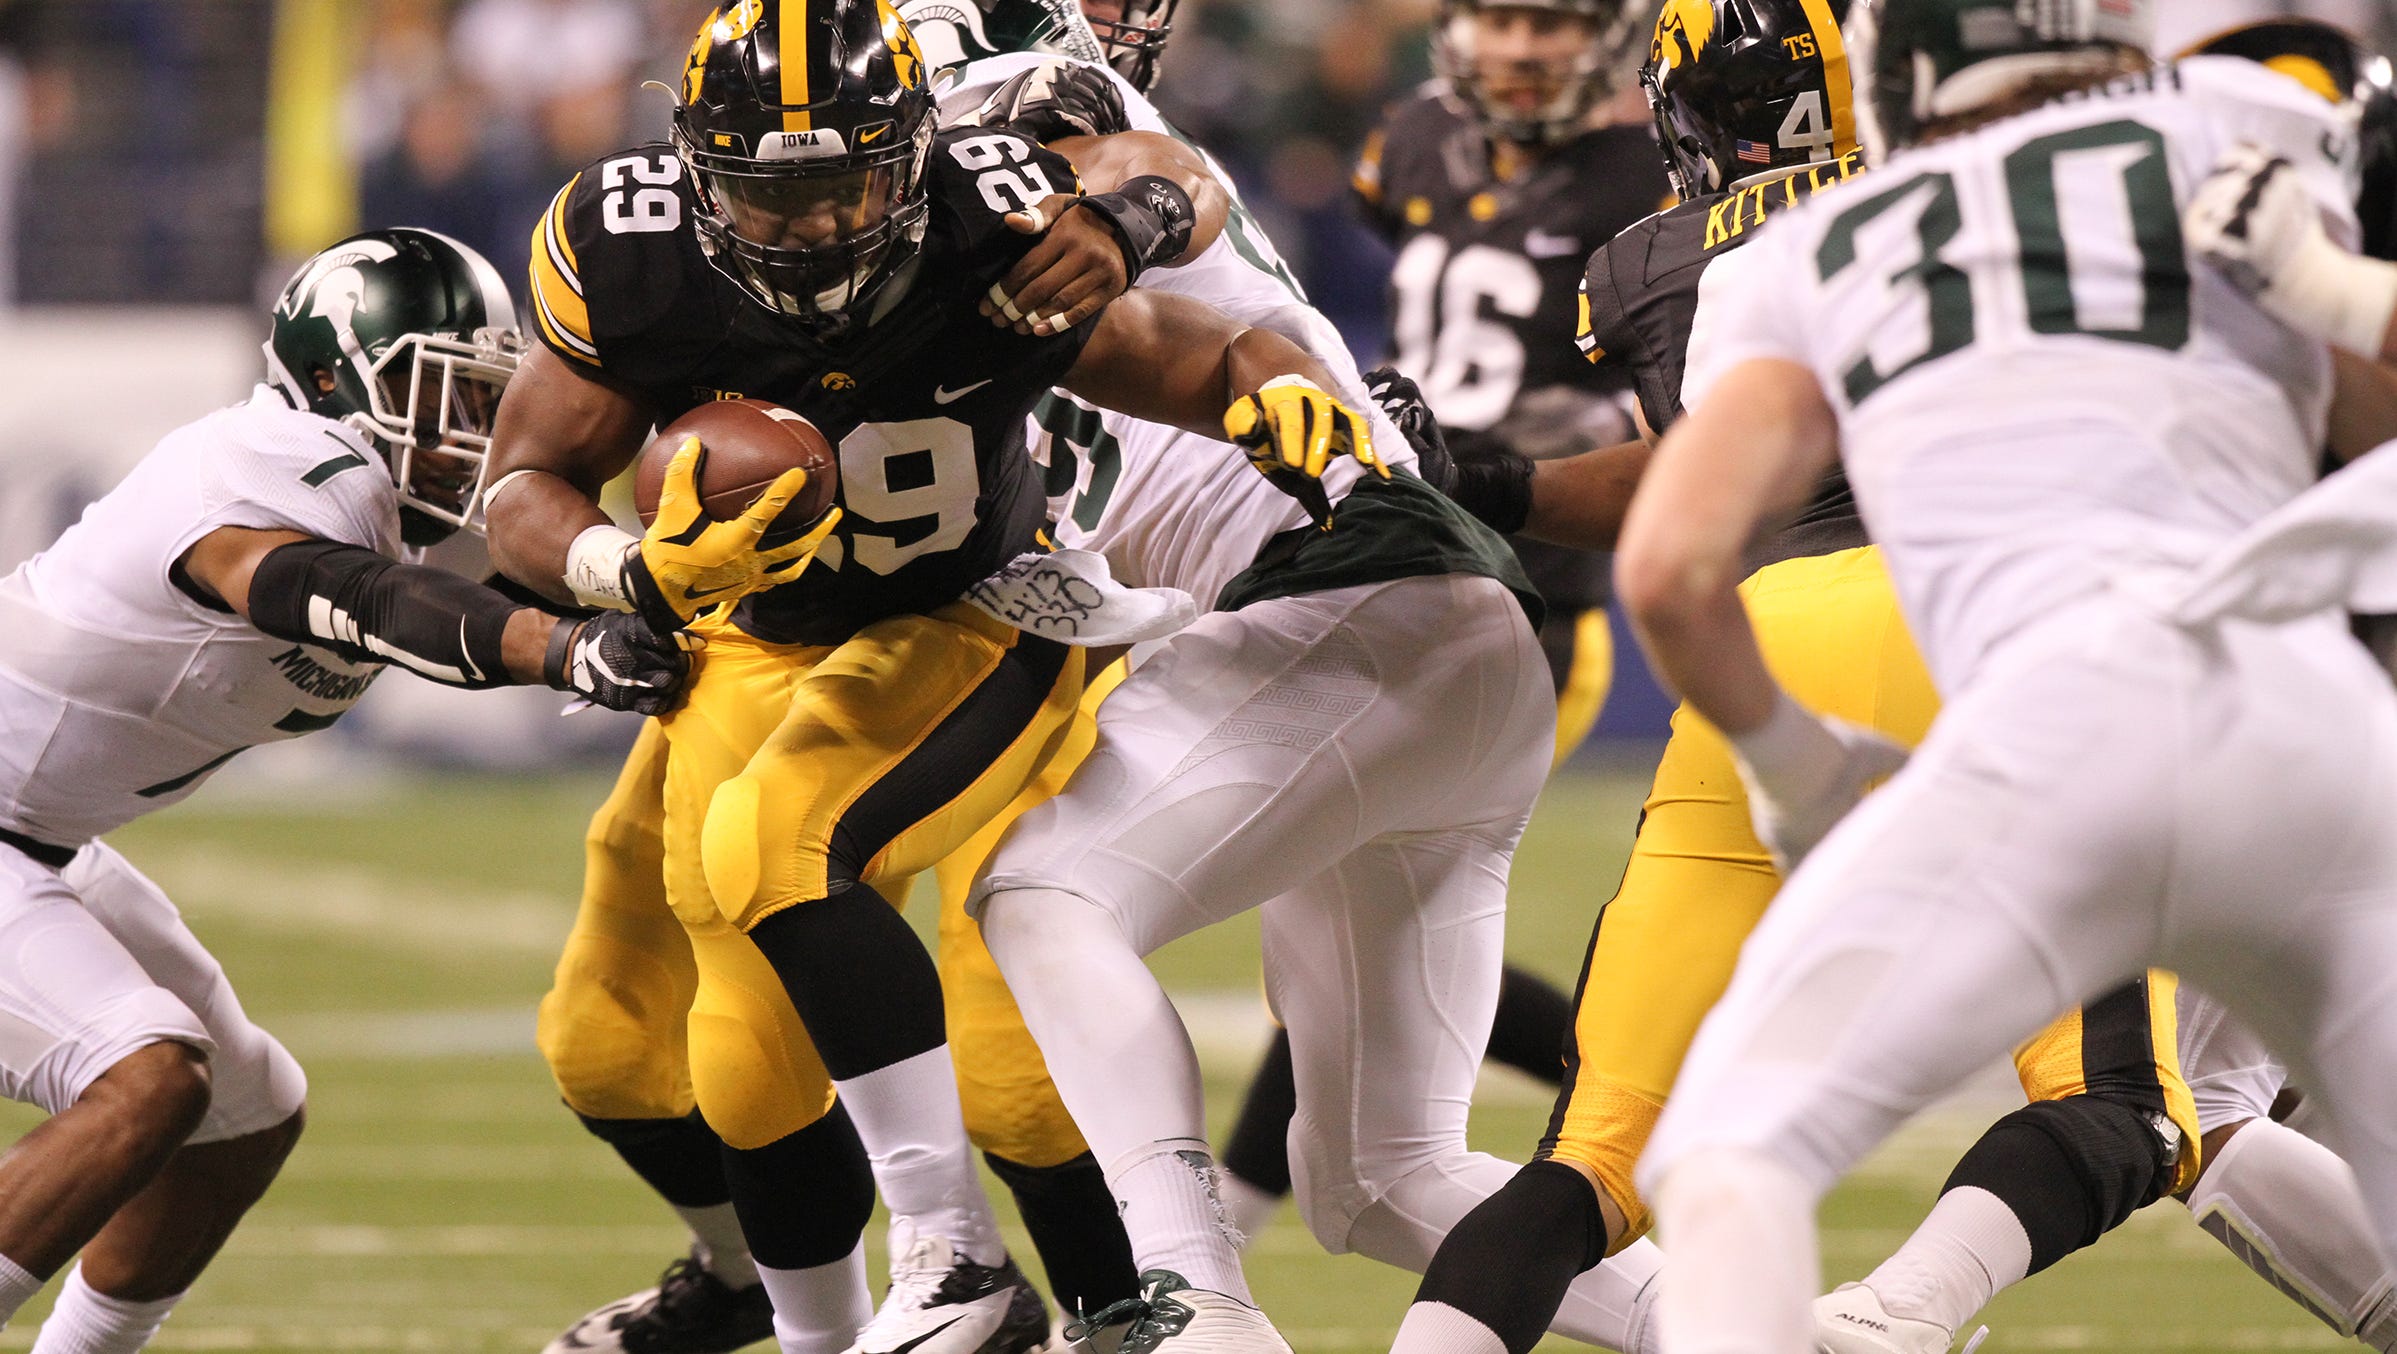 Iowa running back LeShun Daniels, Jr. runs down field during the Hawkeyes' Big Ten Championship game against Michigan State at Lucas Oil Stadium in Indianapolis, Ind. on Saturday, Dec. 5, 2015.